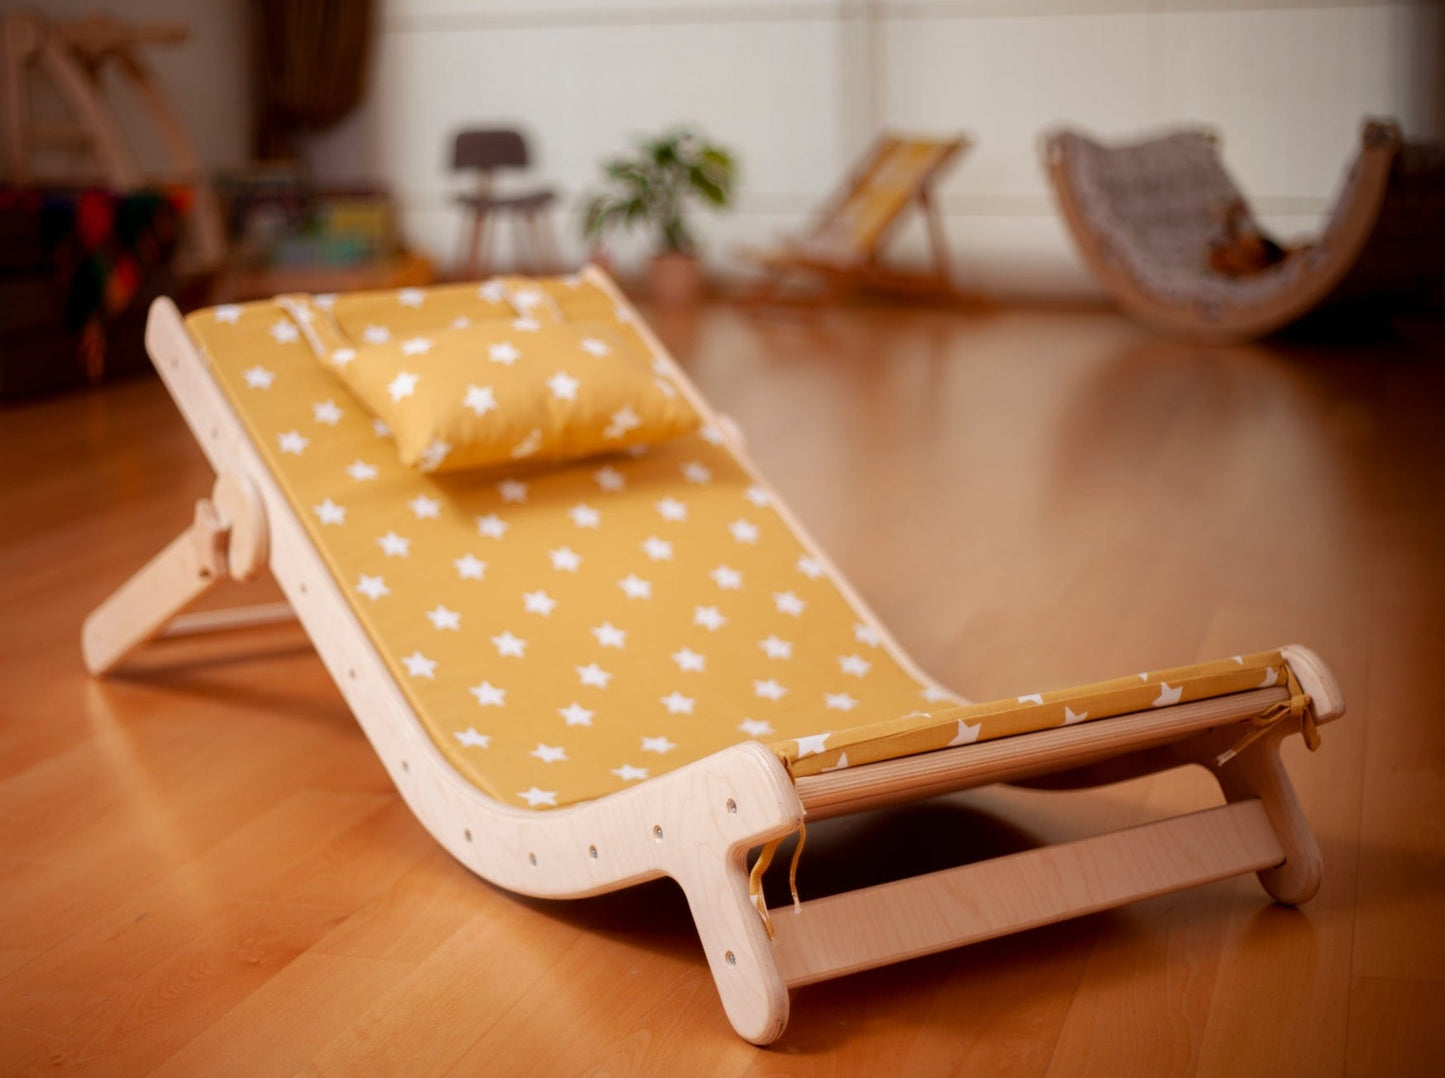 Adjustable Lounge Chair with Comfy Pad for Kids